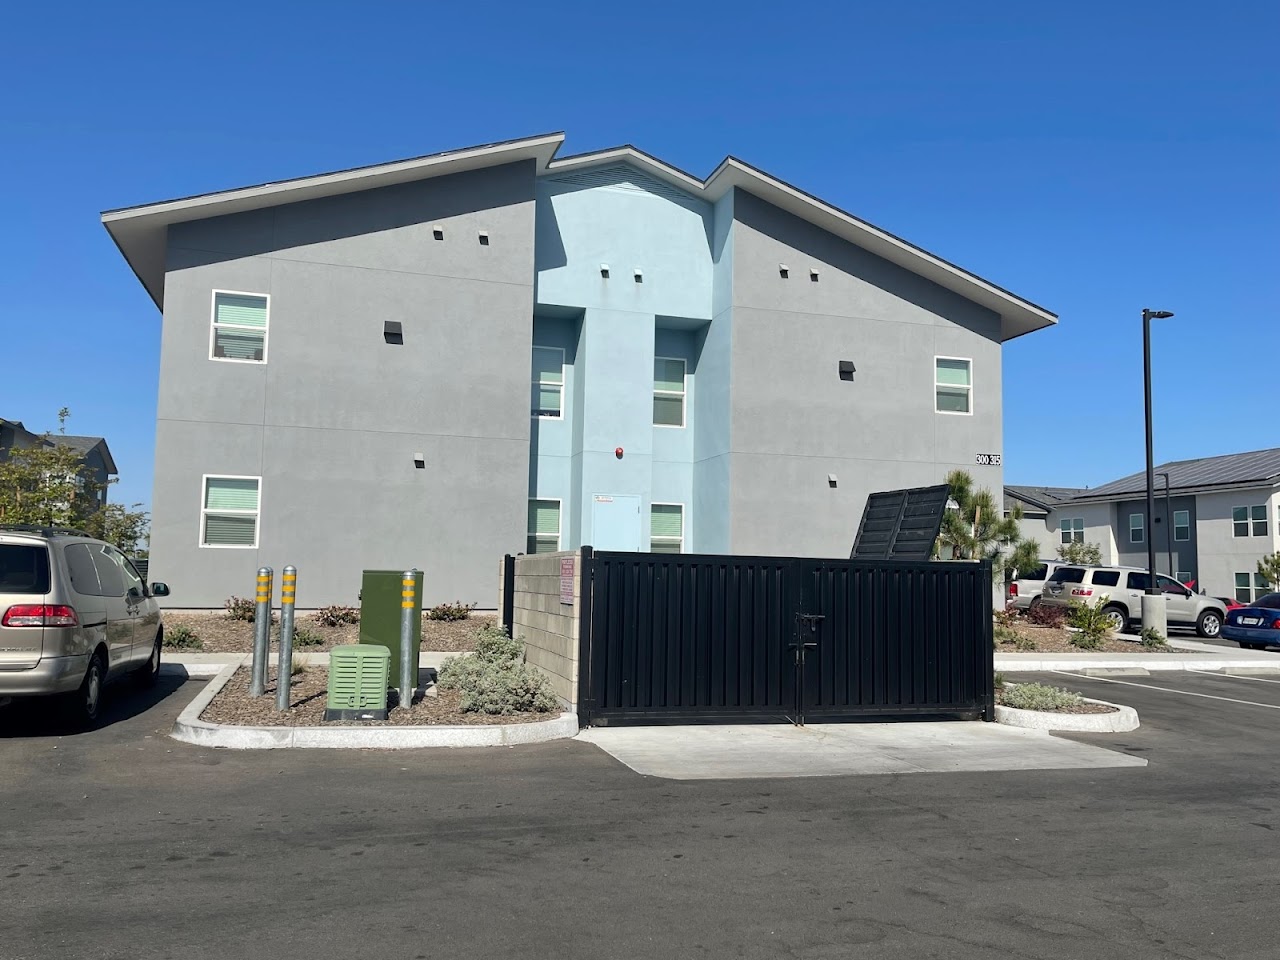 Photo of VILLAGE AT EAST HILLS. Affordable housing located at 2701 BERNARD ST BAKERSFIELD, CA 93306